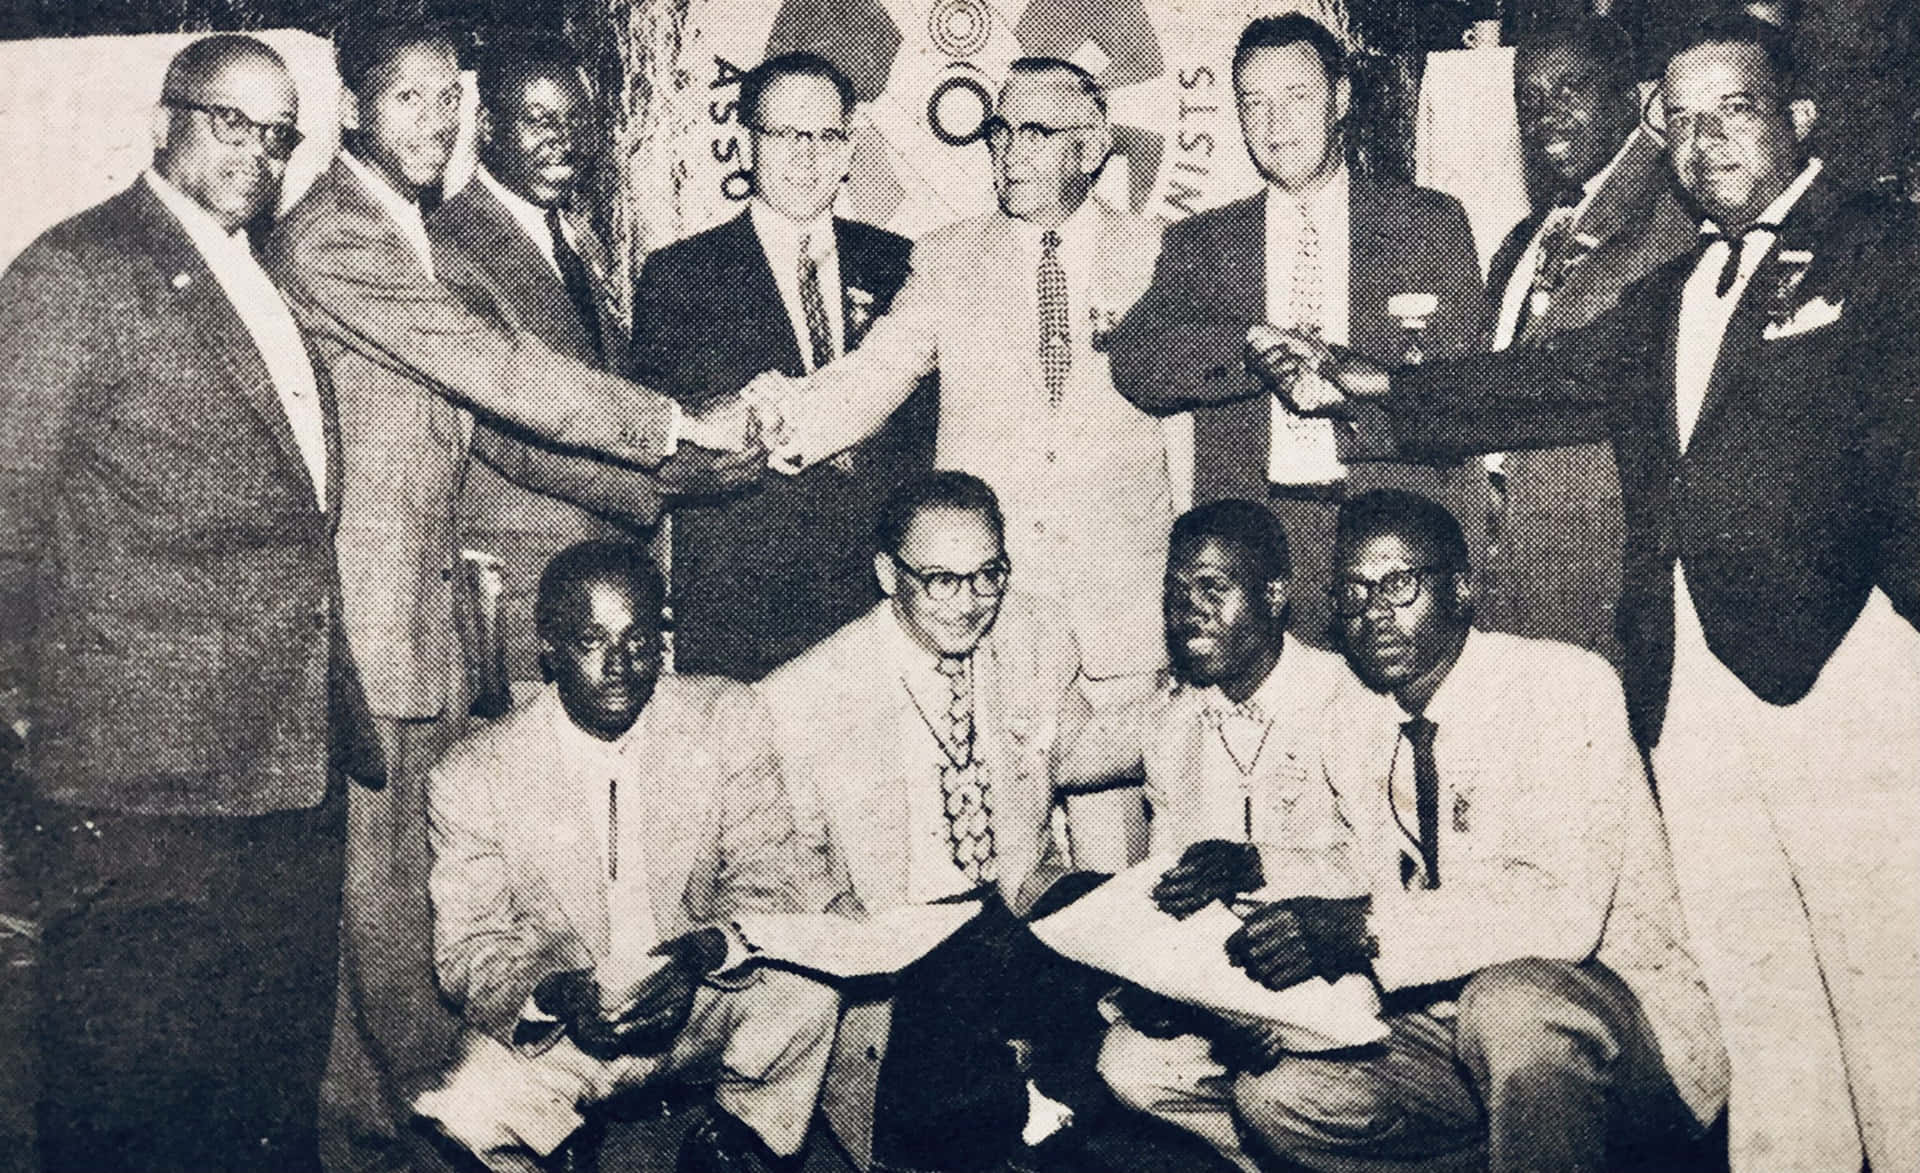 A Group Of Men In Suits And Ties Standing Together